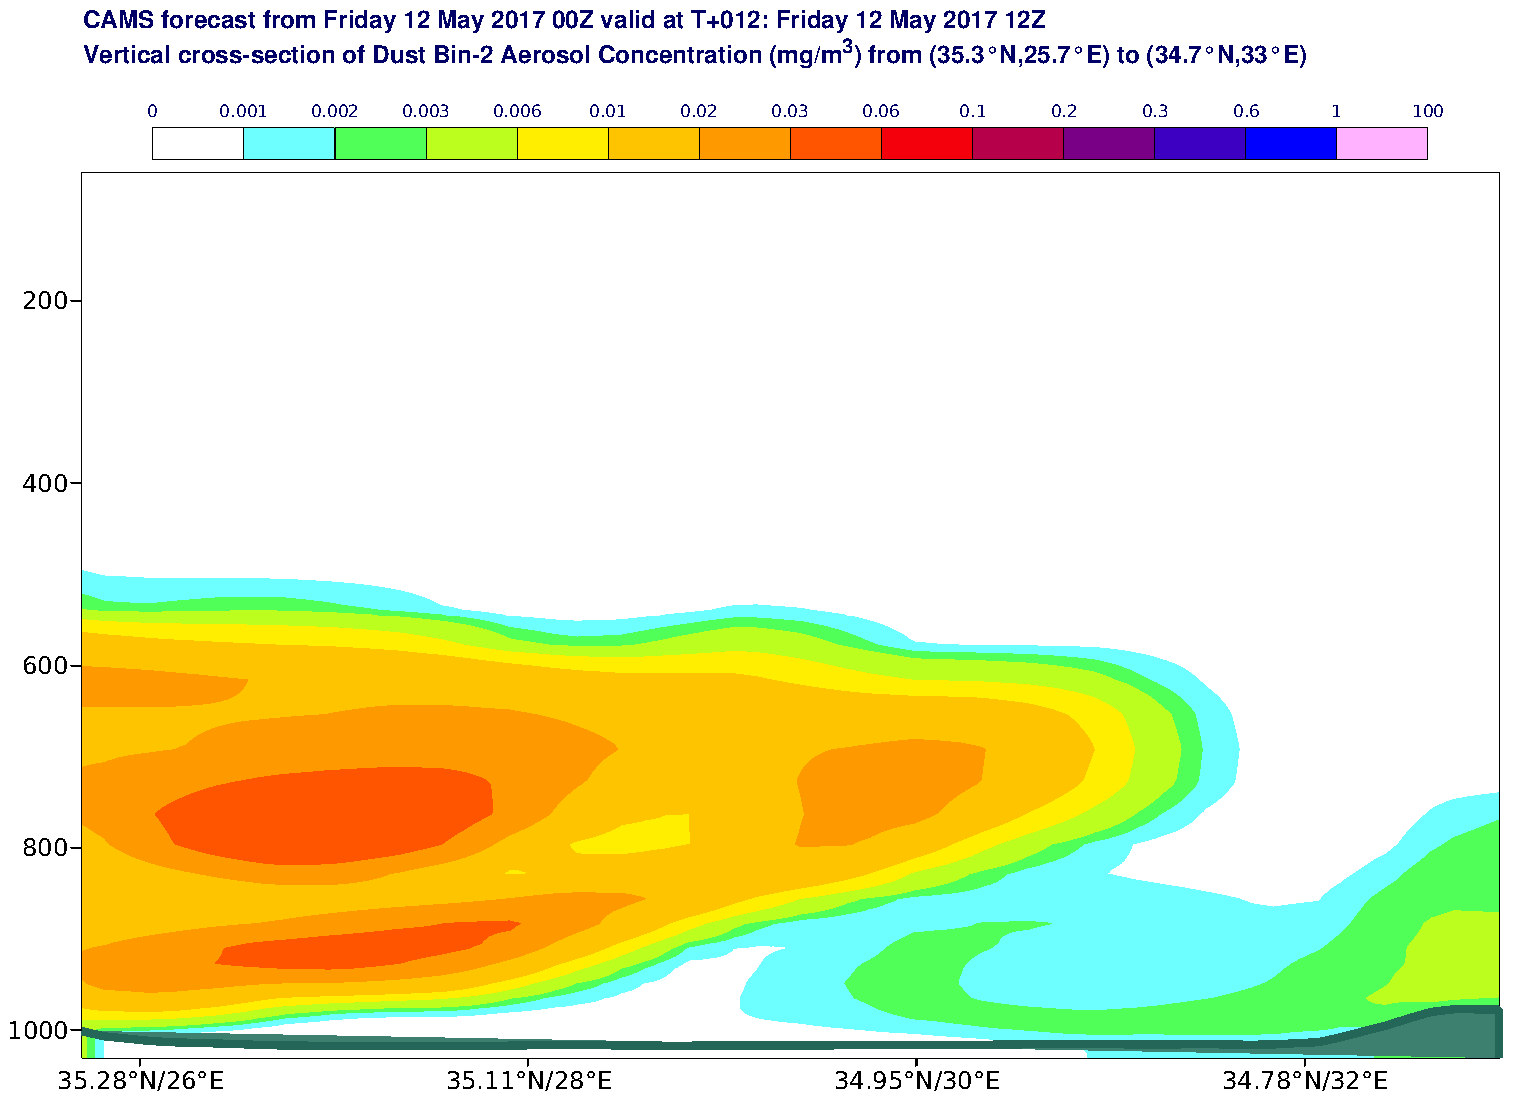 Vertical cross-section of Dust Bin-2 Aerosol Concentration (mg/m3) valid at T12 - 2017-05-12 12:00